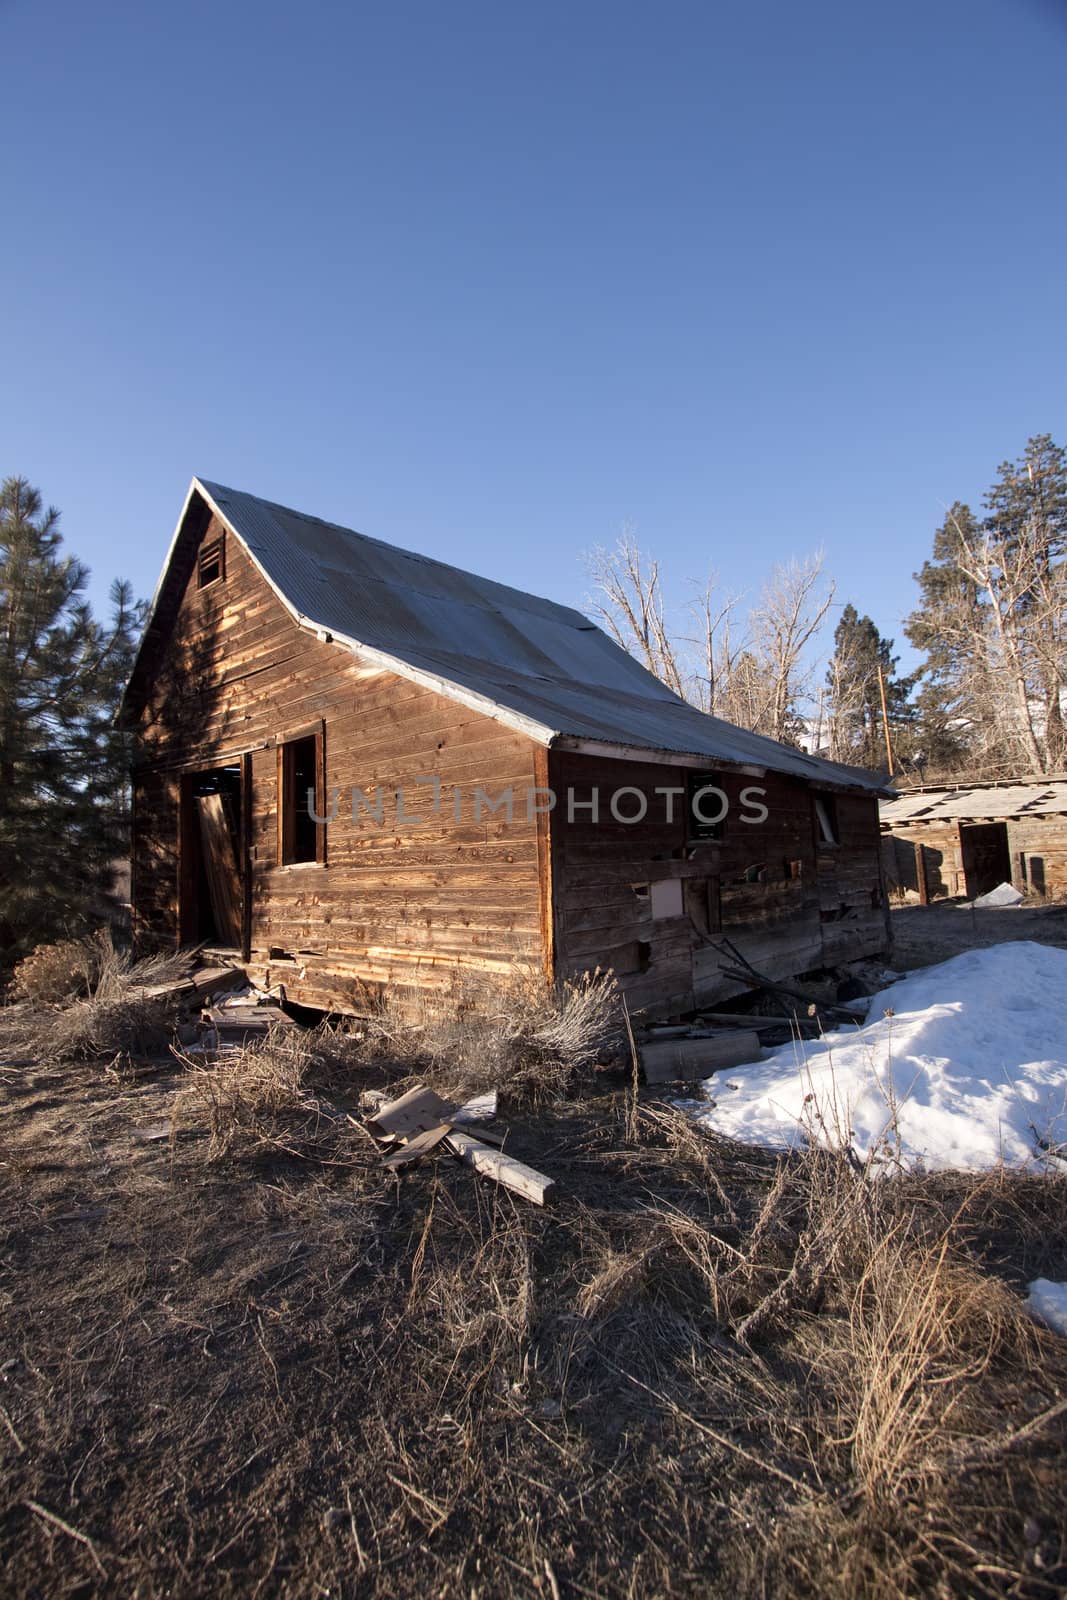 an old abandoned barn or cabin in the forest